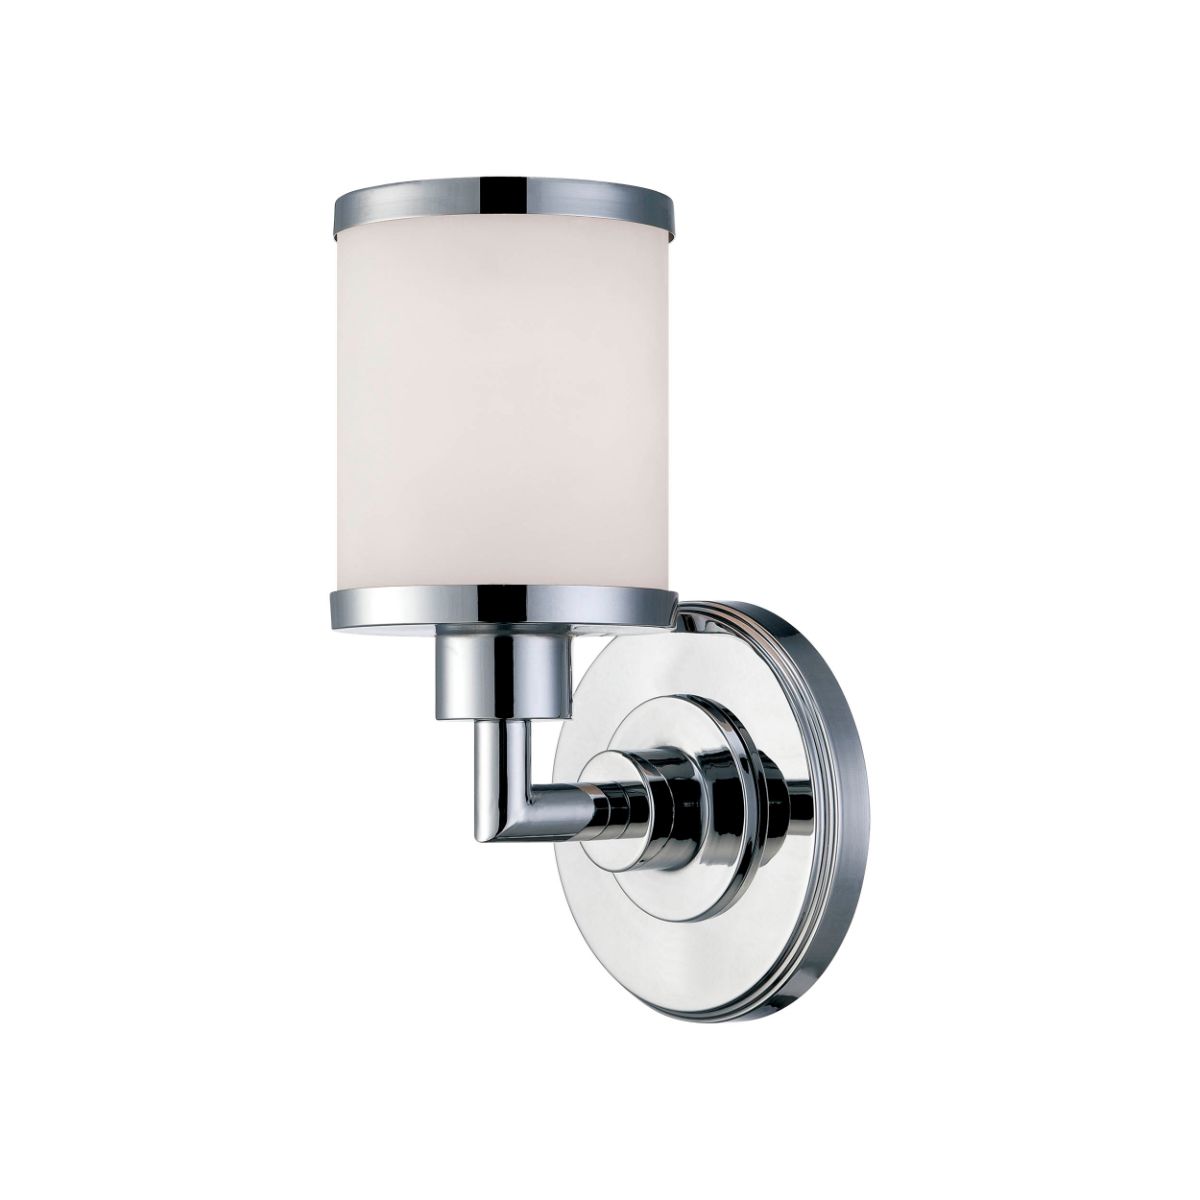 11 in. Armed Sconce Chrome finish